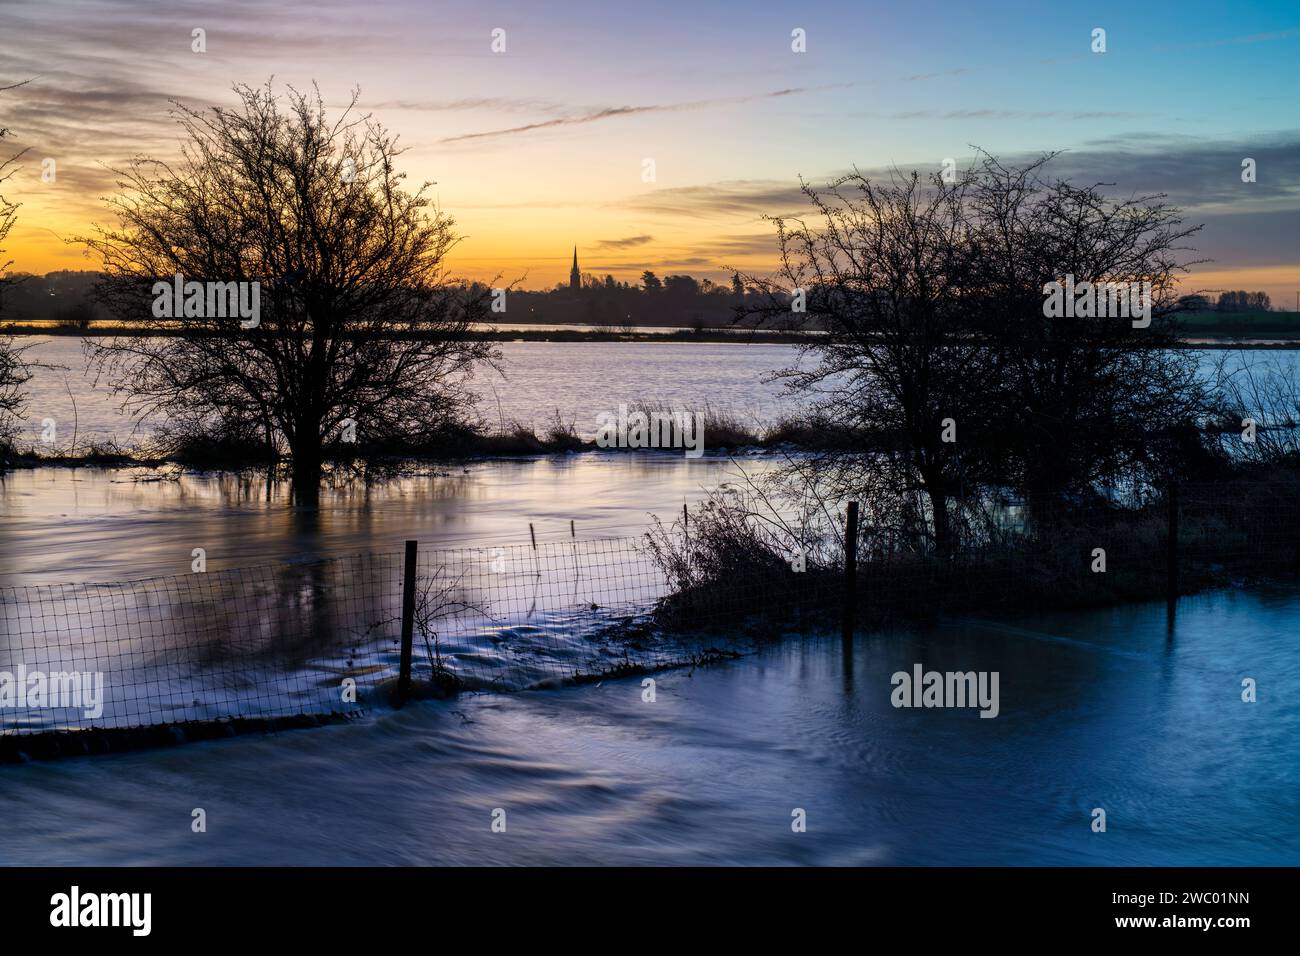 Floods along the river cherwell at sunrise in winter. Kings Sutton, Oxfordshire / Northamptonshire border, England. Stock Photo